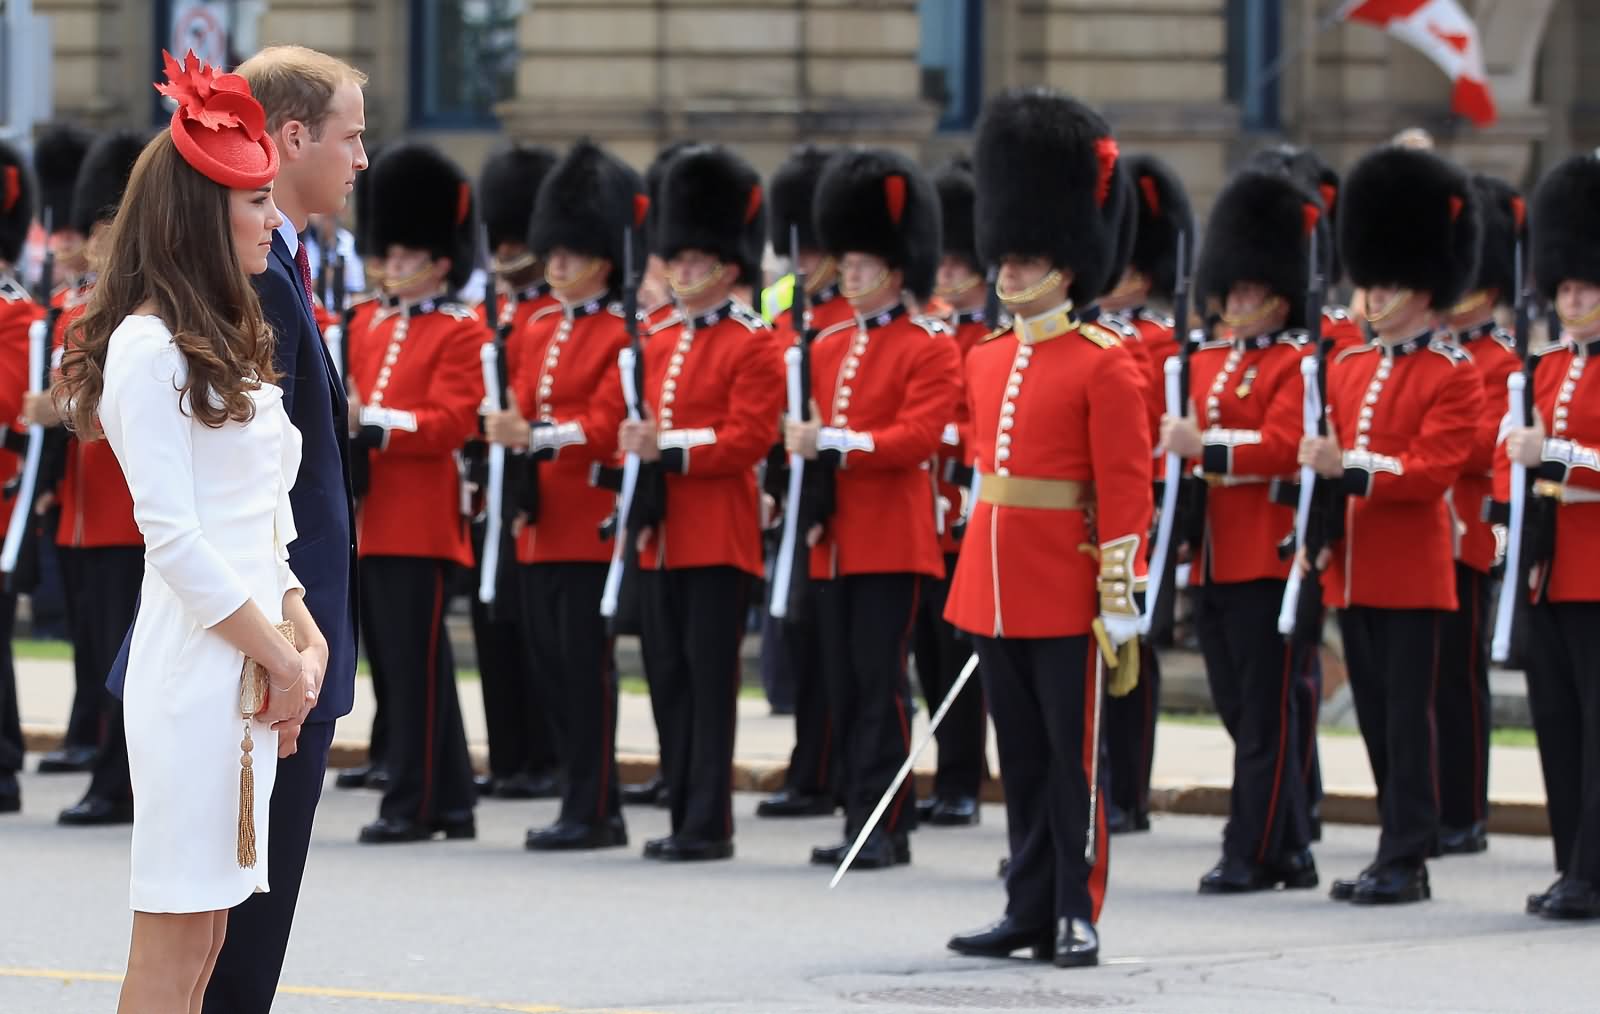 Prince Williams And Kate Middleton Took In Canada Day Parade In Otawa